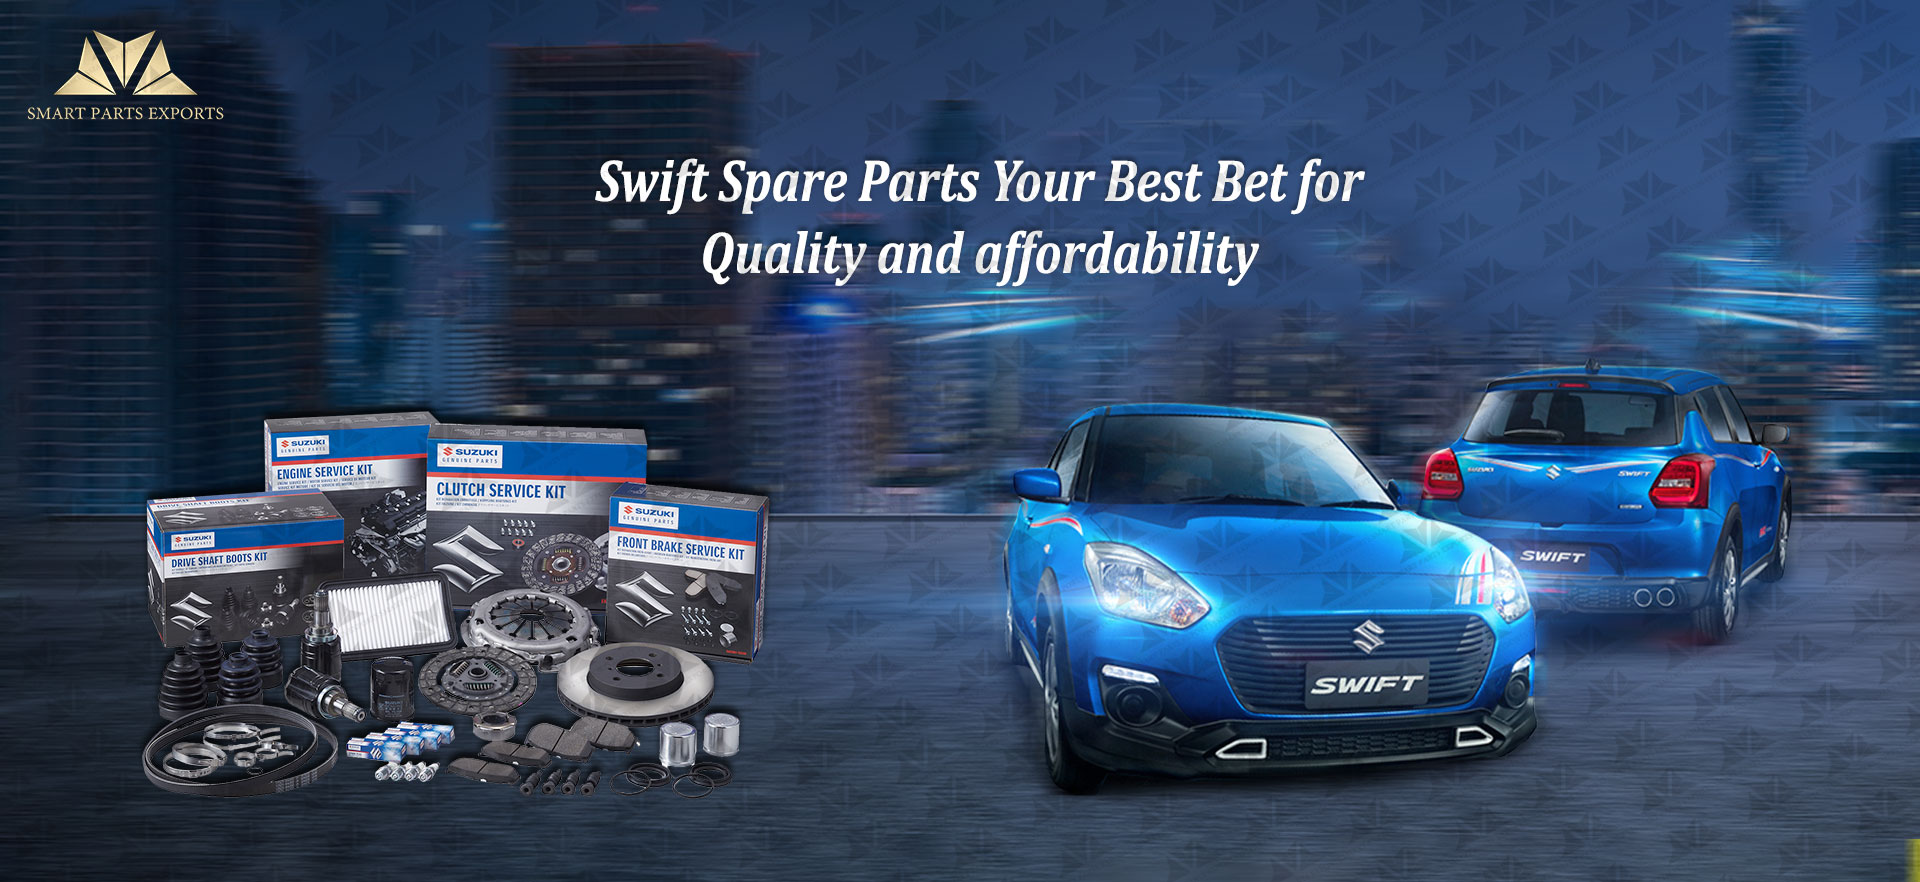 Swift Spare Parts - Your Best Bet for Quality and affordability